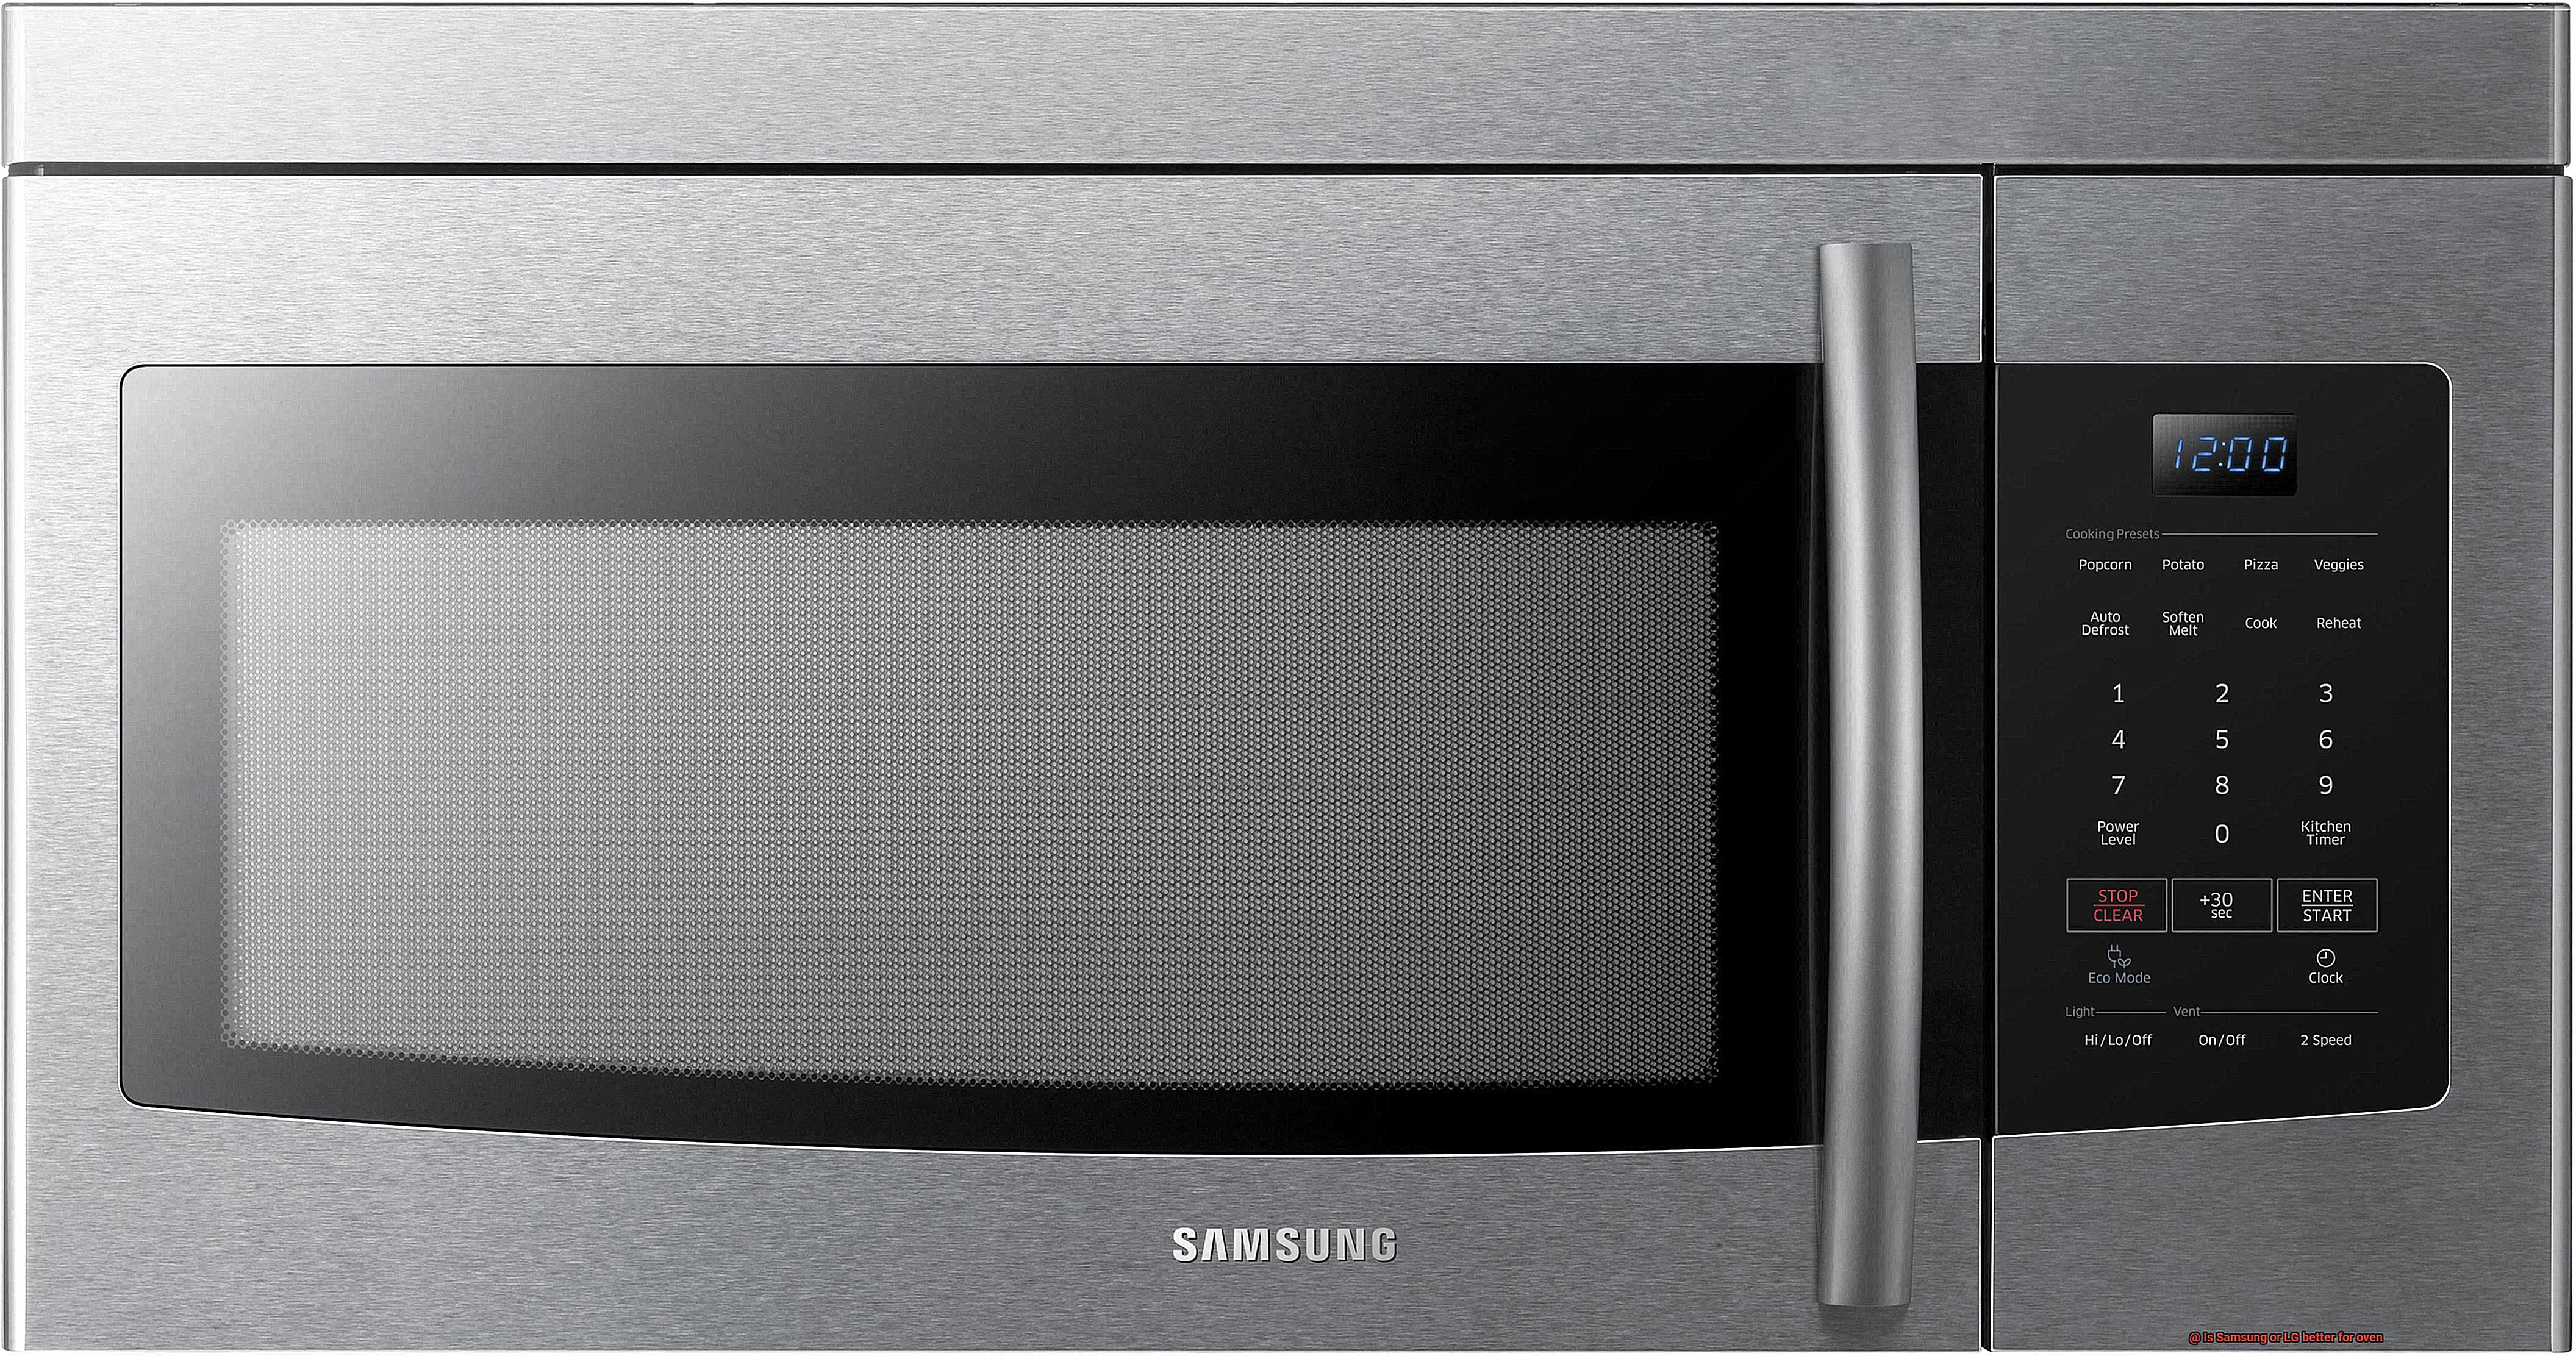 Is Samsung or LG better for oven-2